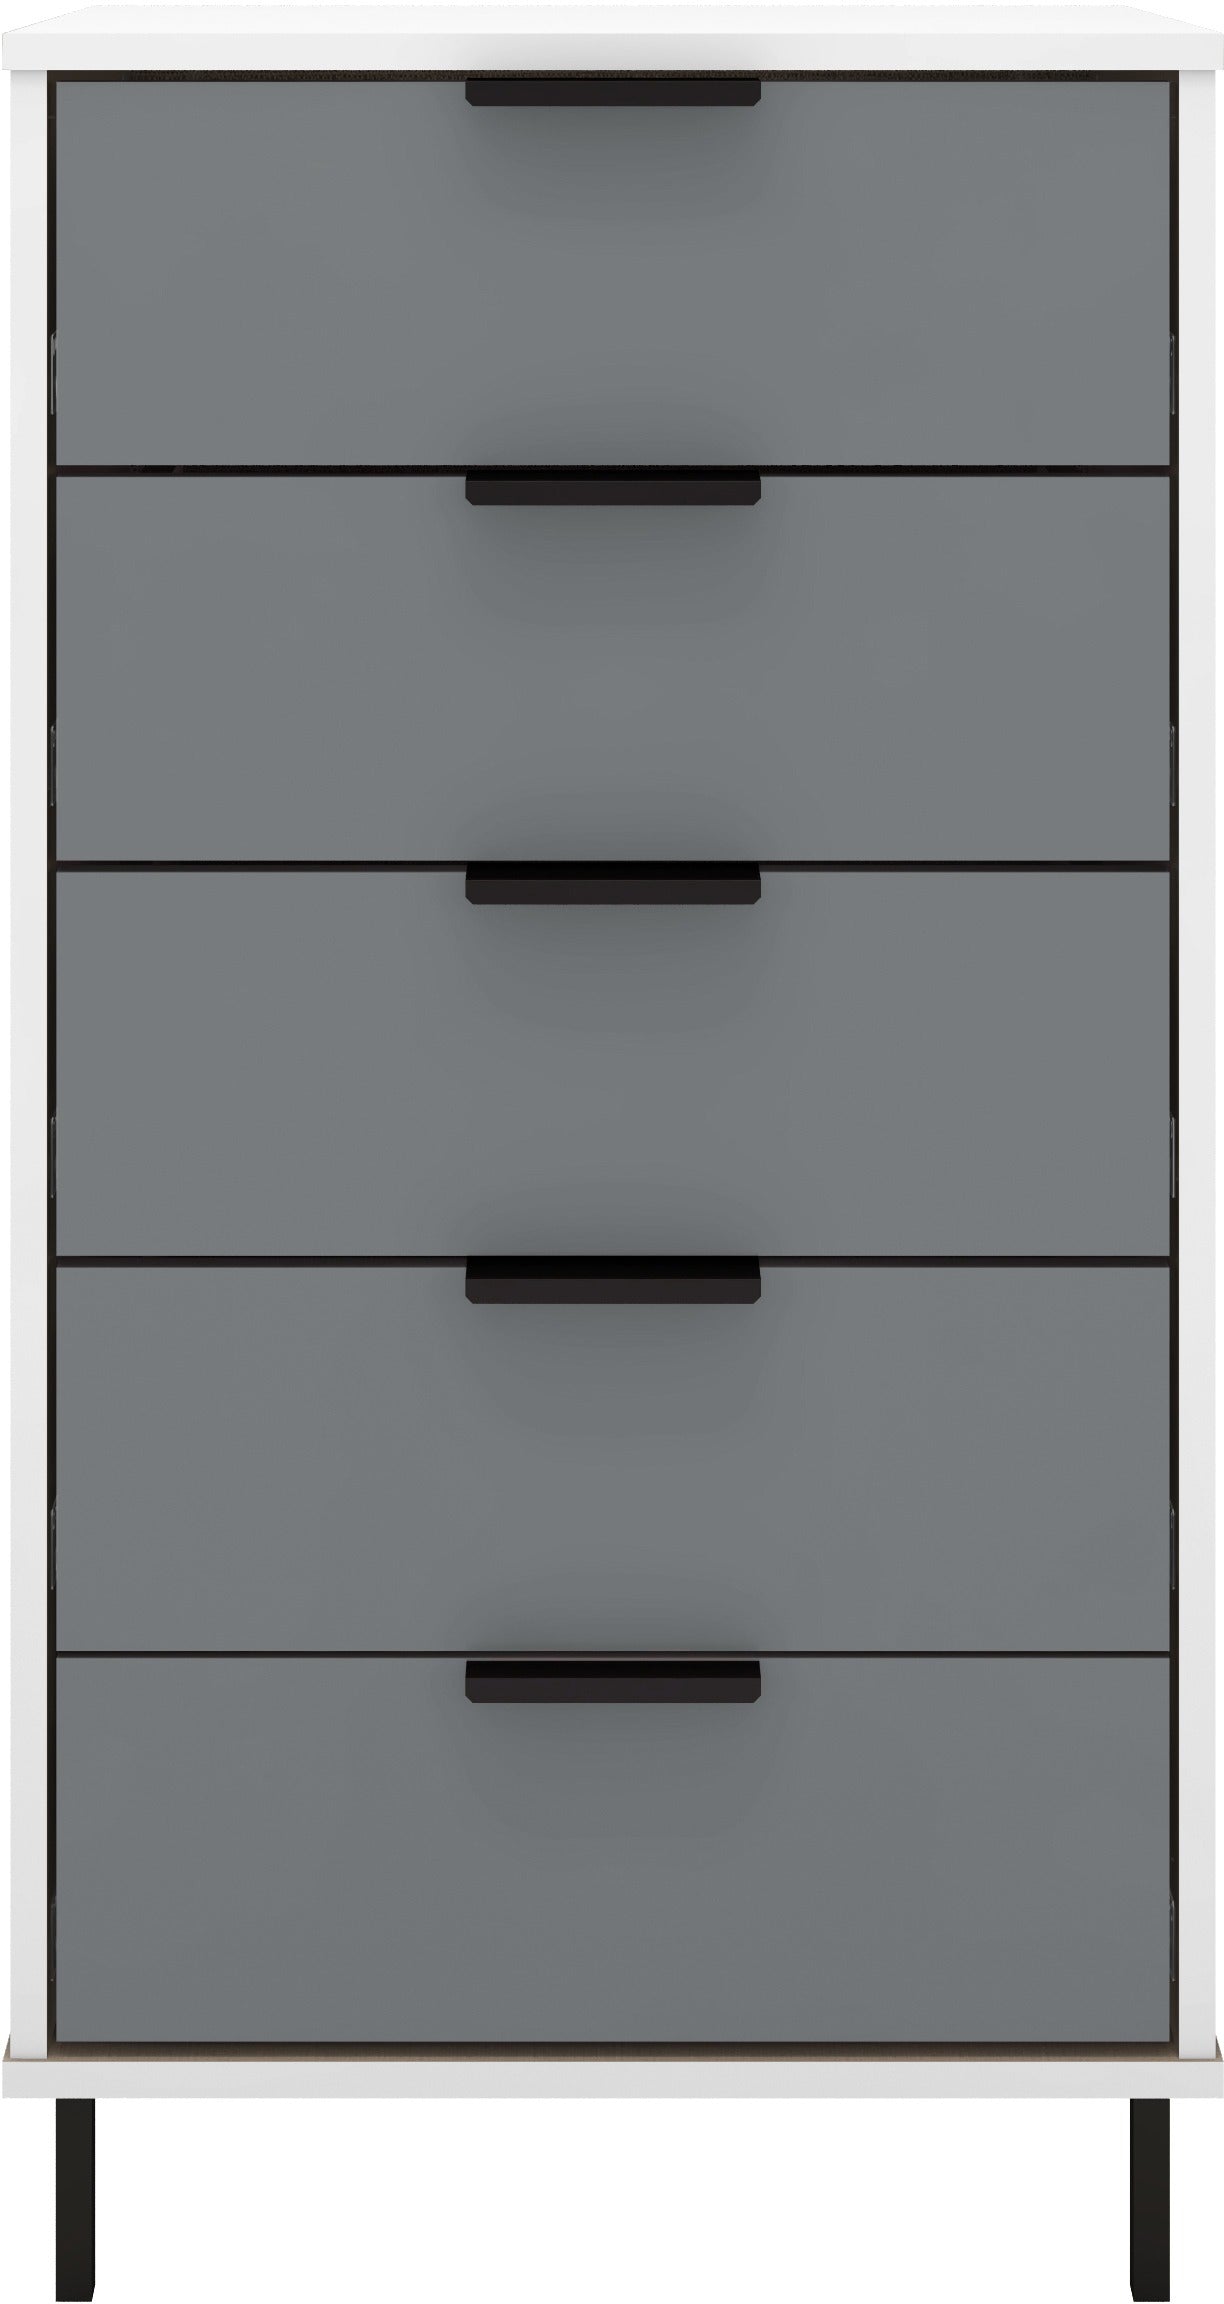 Madrid 5 Drawer Chest of Drawers in Grey and White Gloss Finish